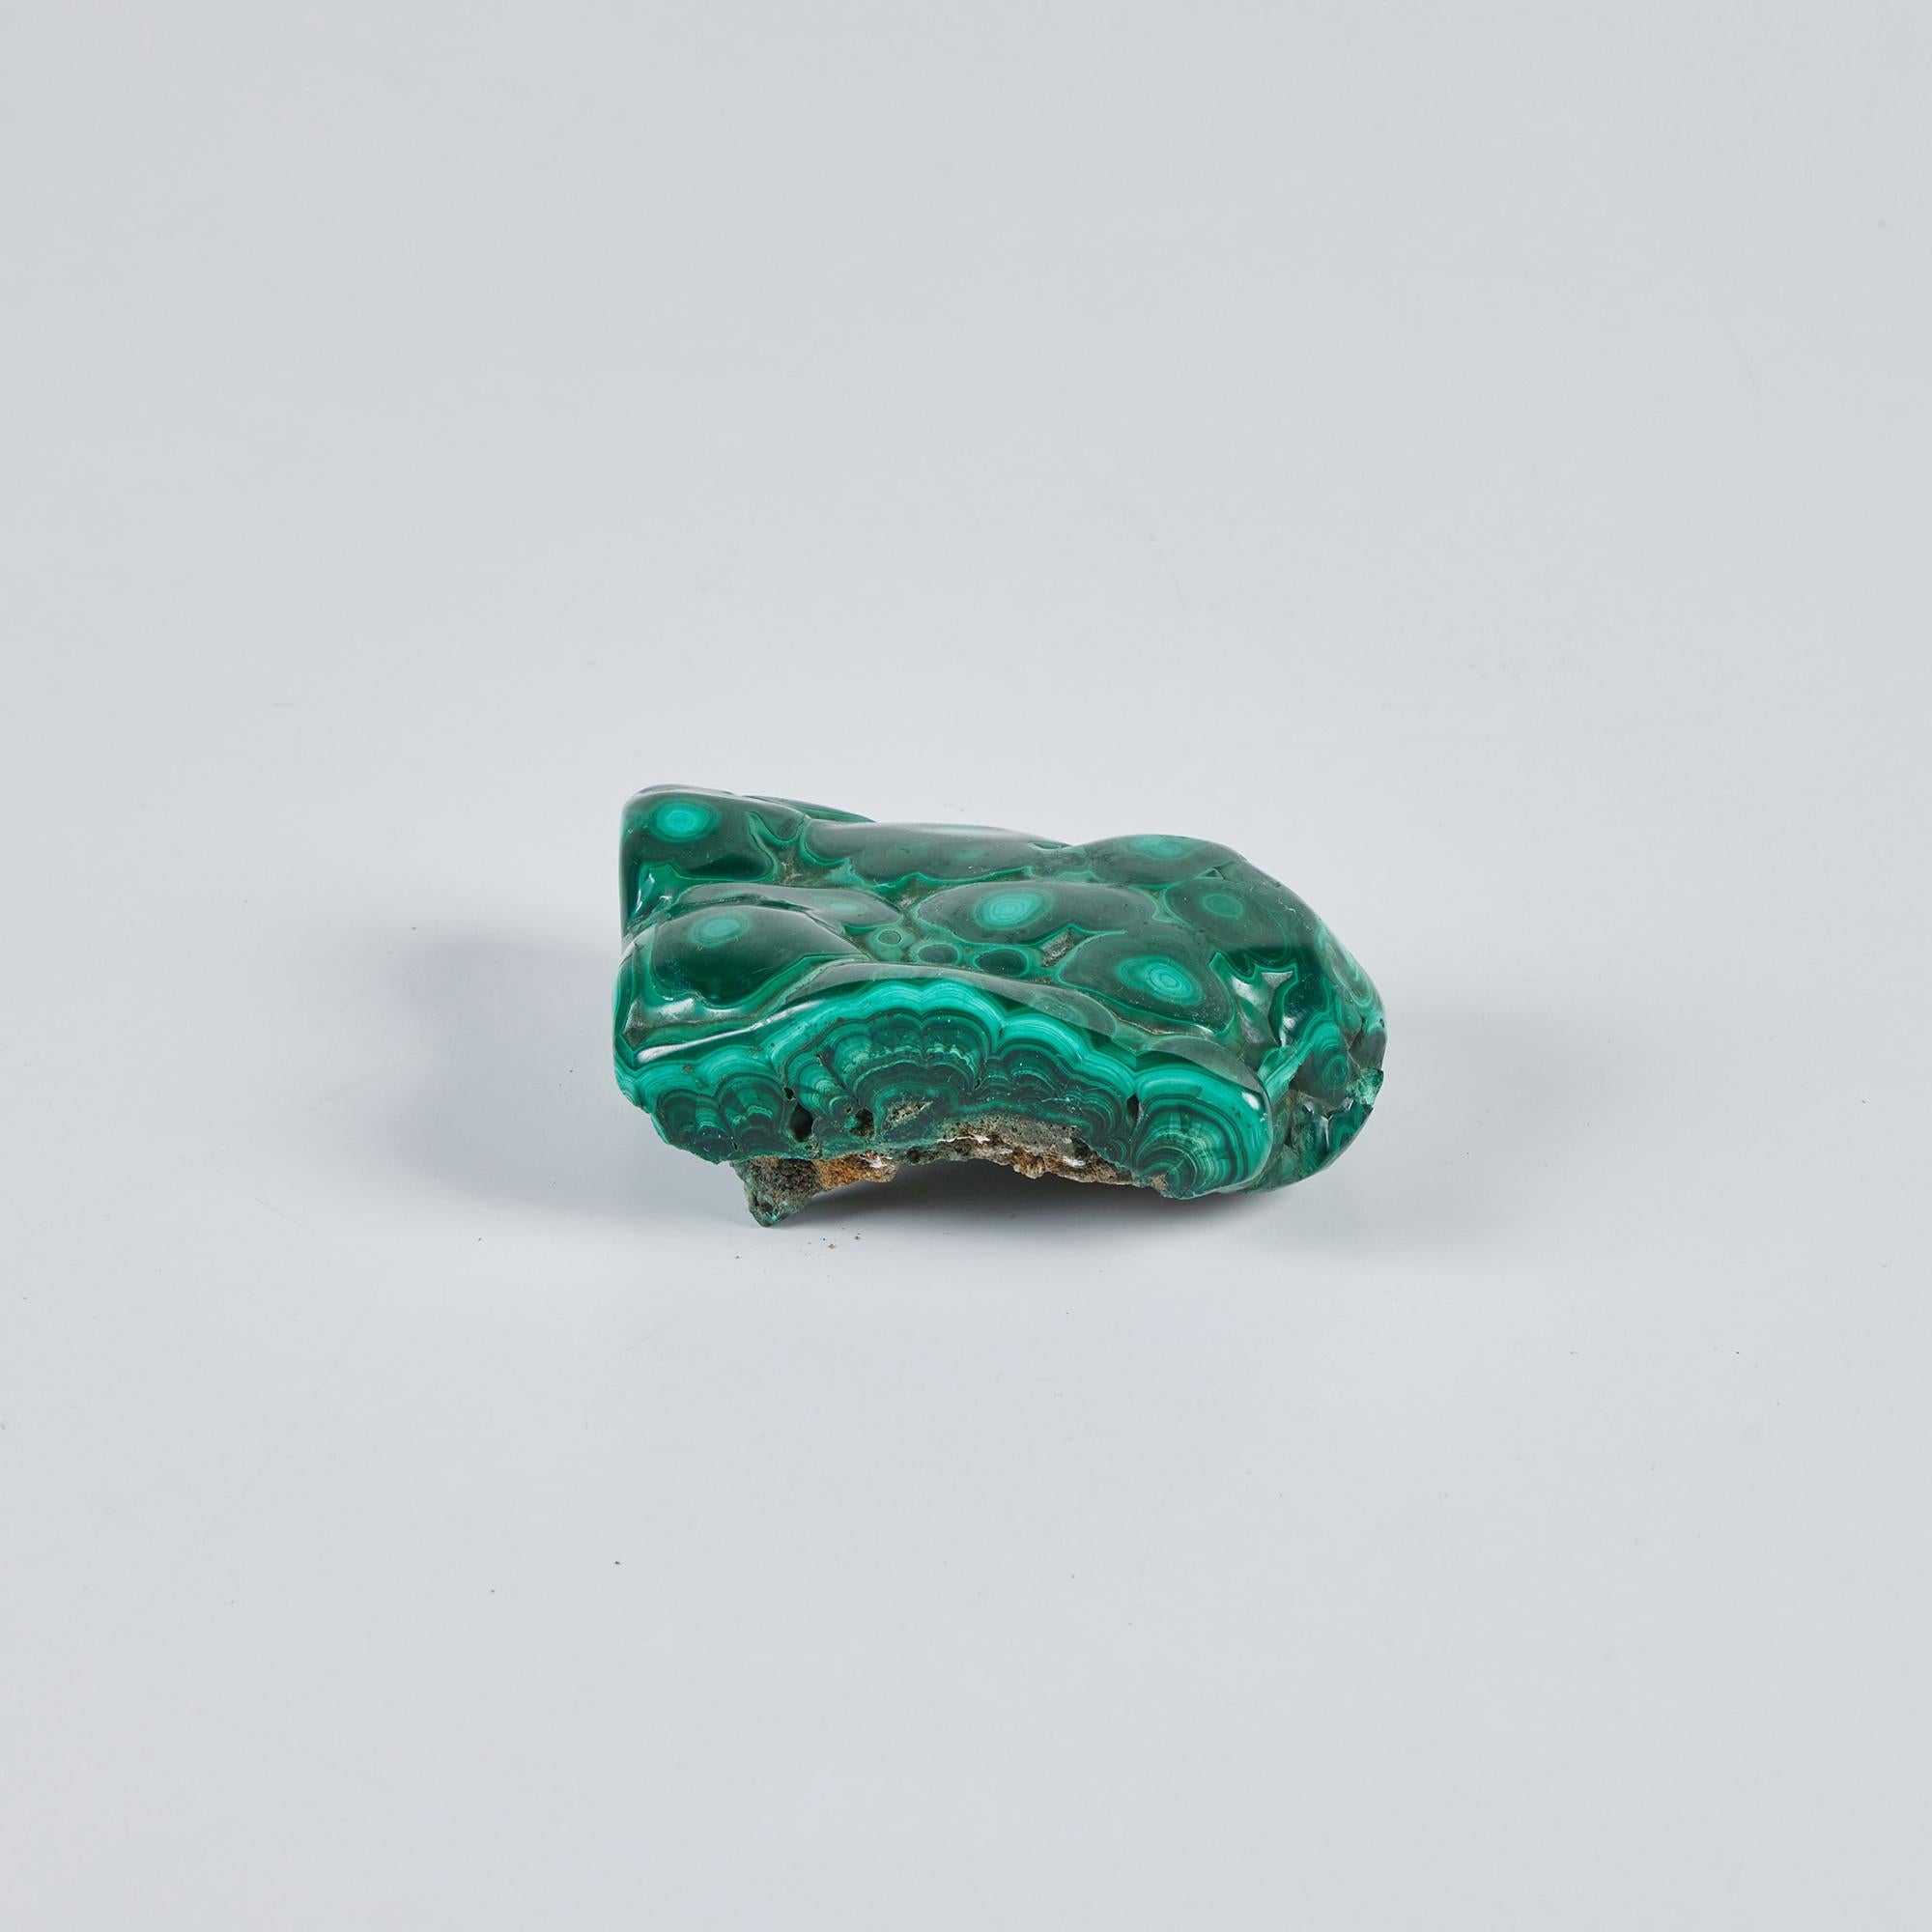 Biomorphic Malachite sculpture has a polished surface and raw rock bottom. The opaque polished stone features round patterned top and a textured underside. A playful sculpture or paper weight.

Dimensions
4.5